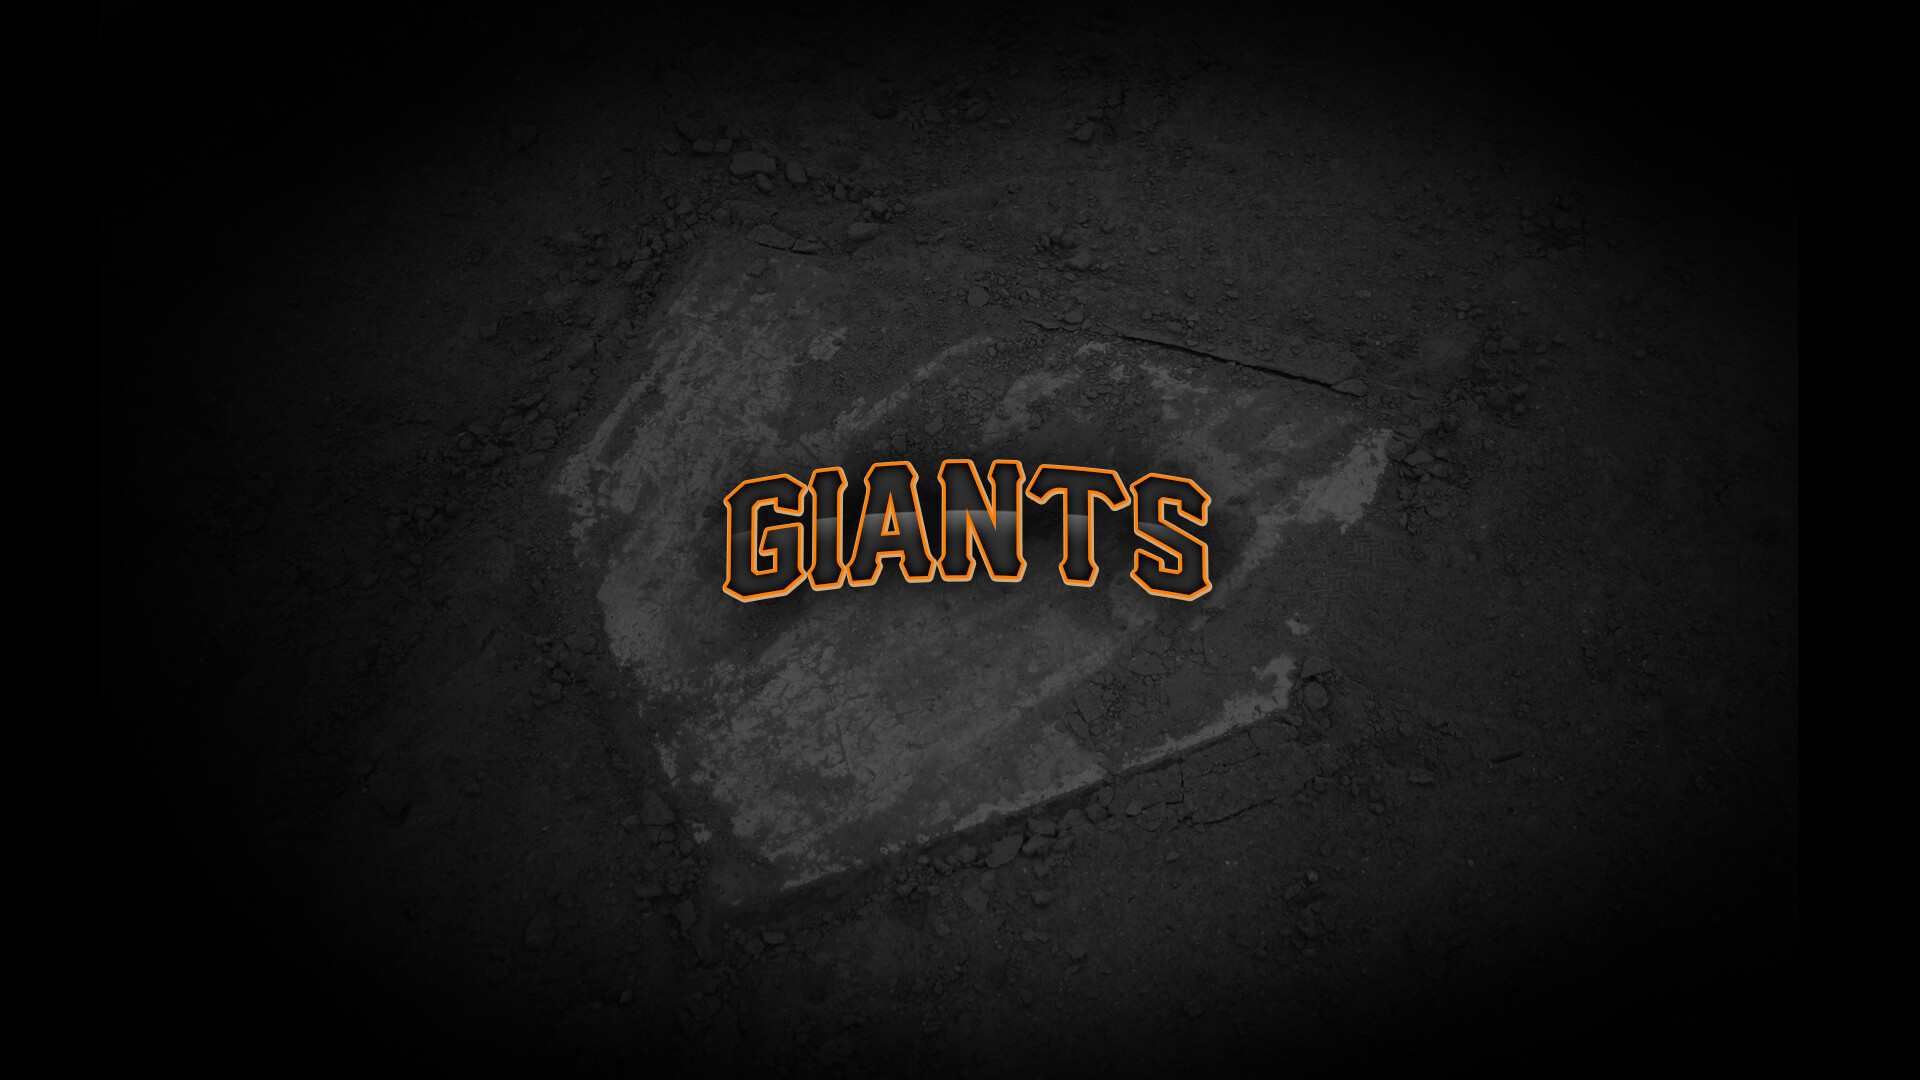 San Francisco Giants: Five-time World Series championships winners, The Baseball Hall of Fame members. 1920x1080 Full HD Background.